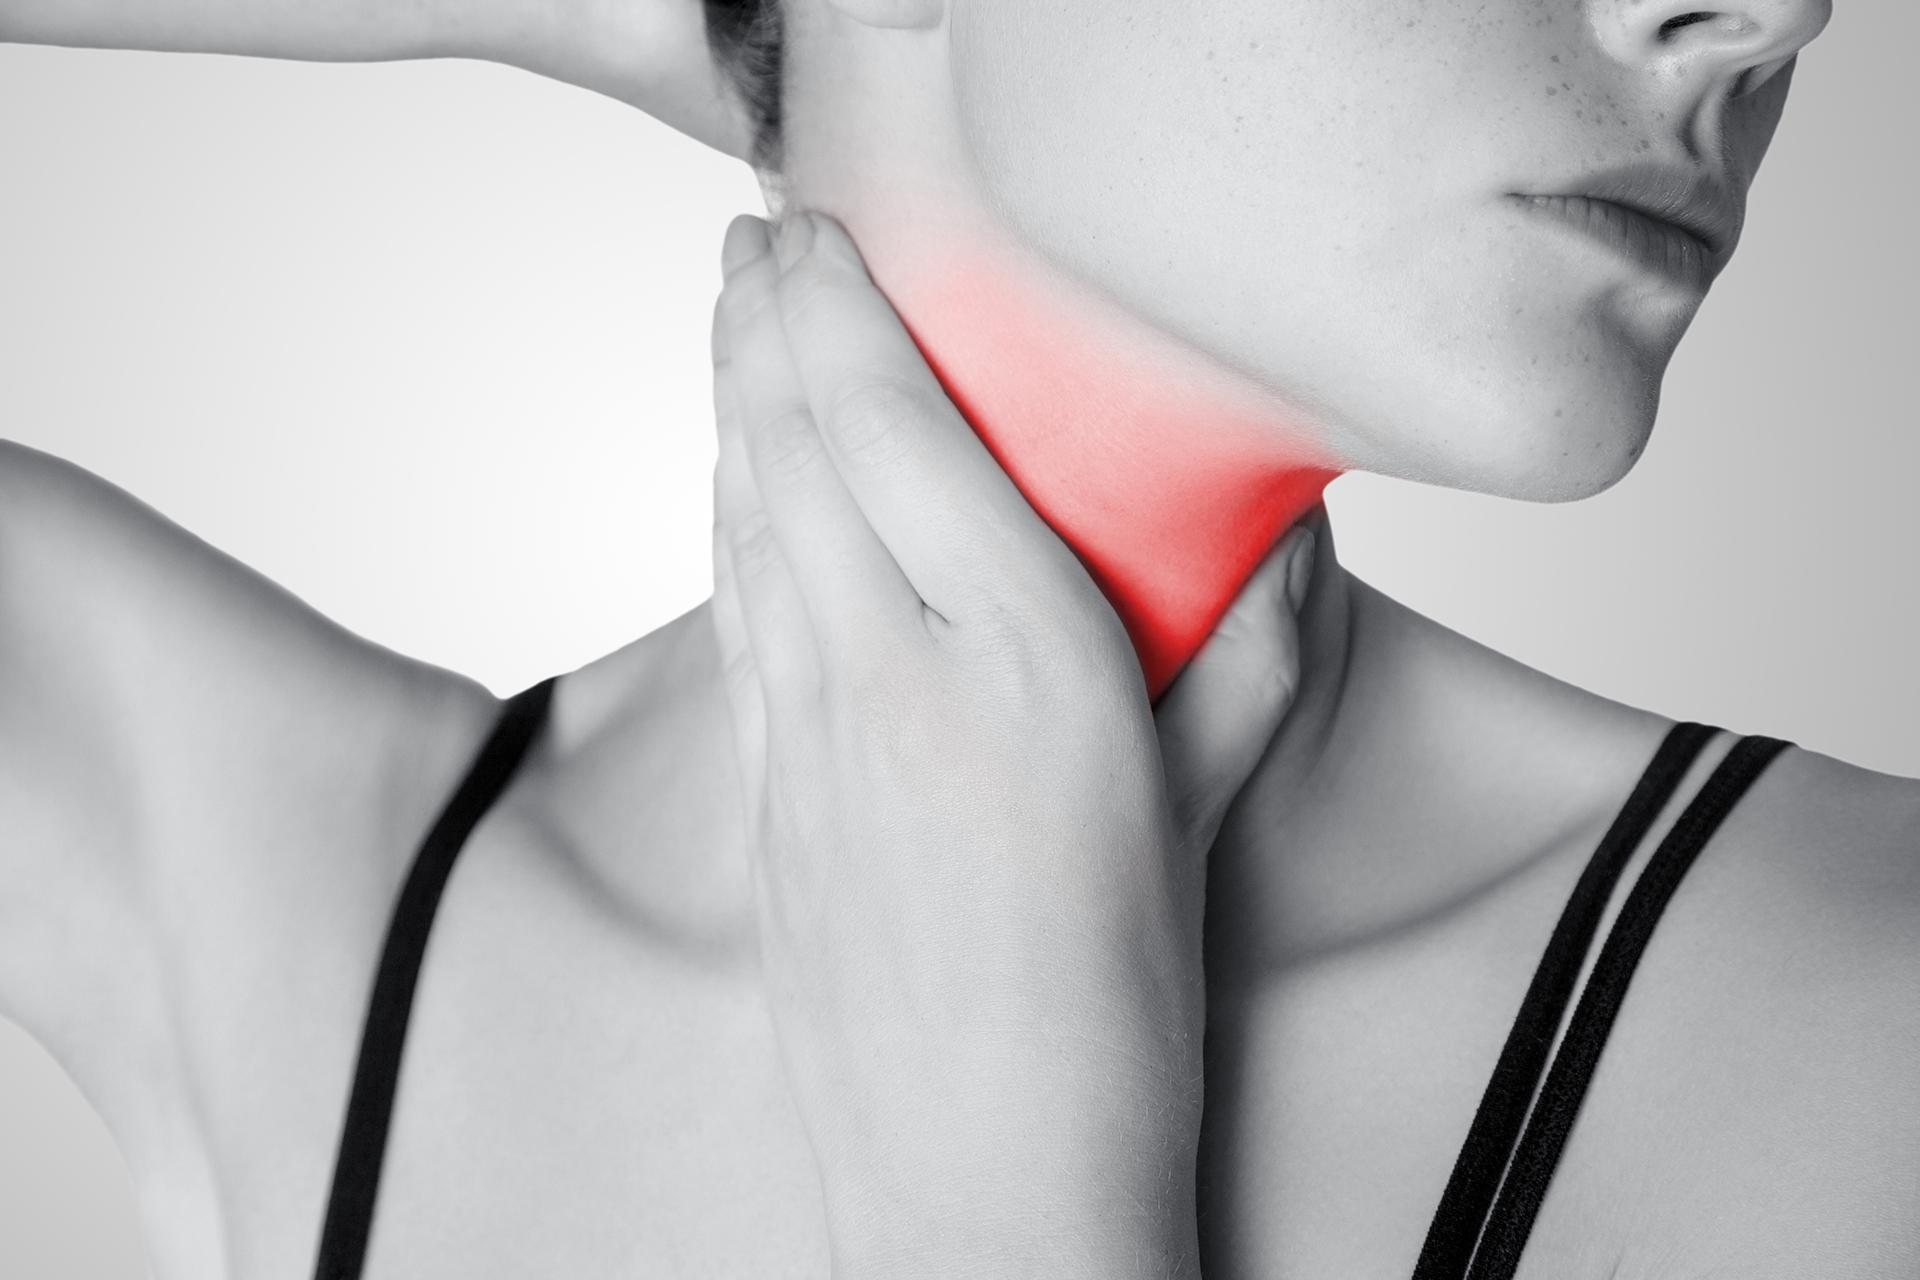 Head and Neck Cancer: Causes, Symptoms and Treatment